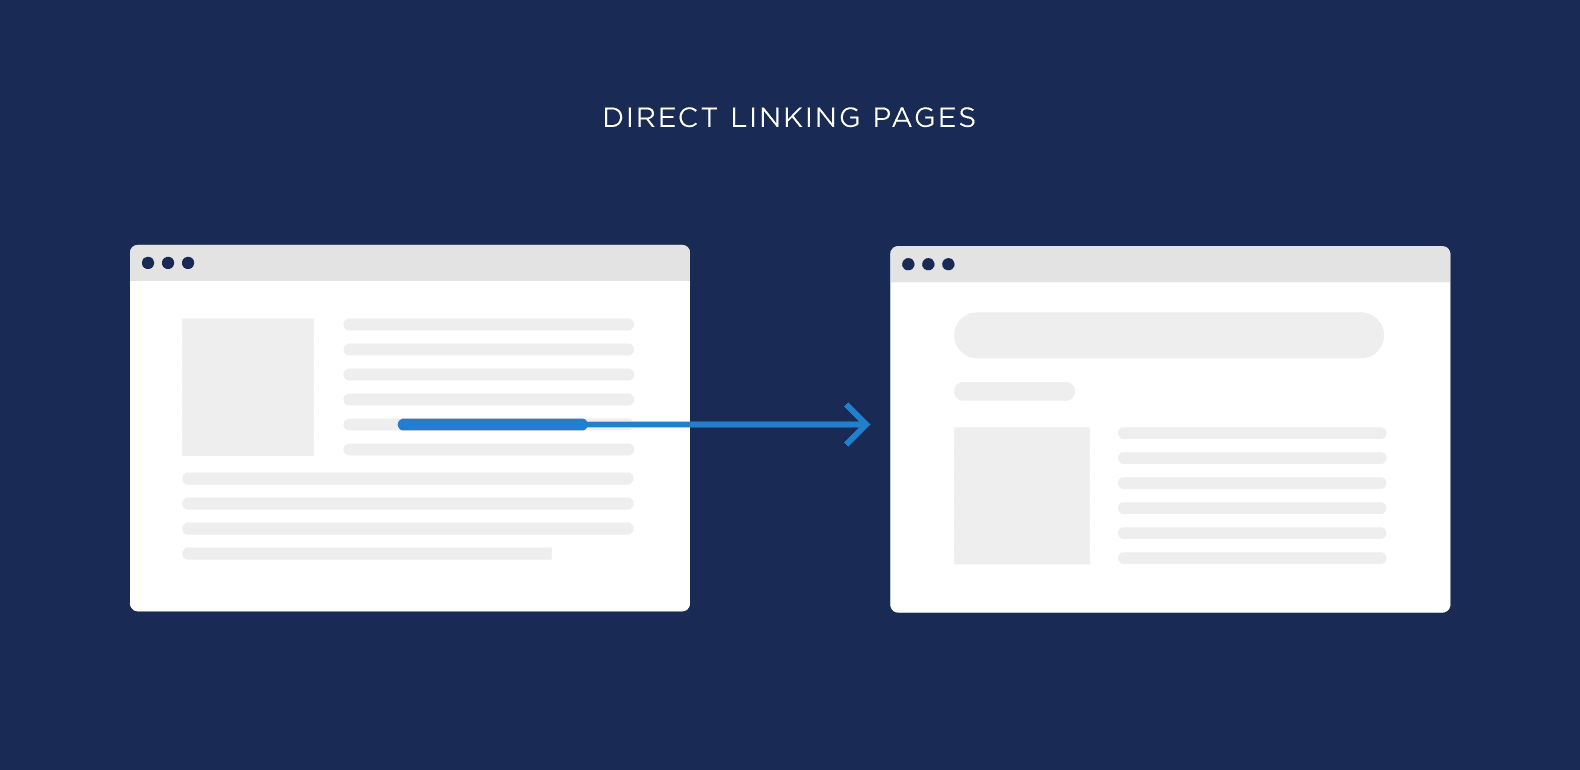 Direct linking pages